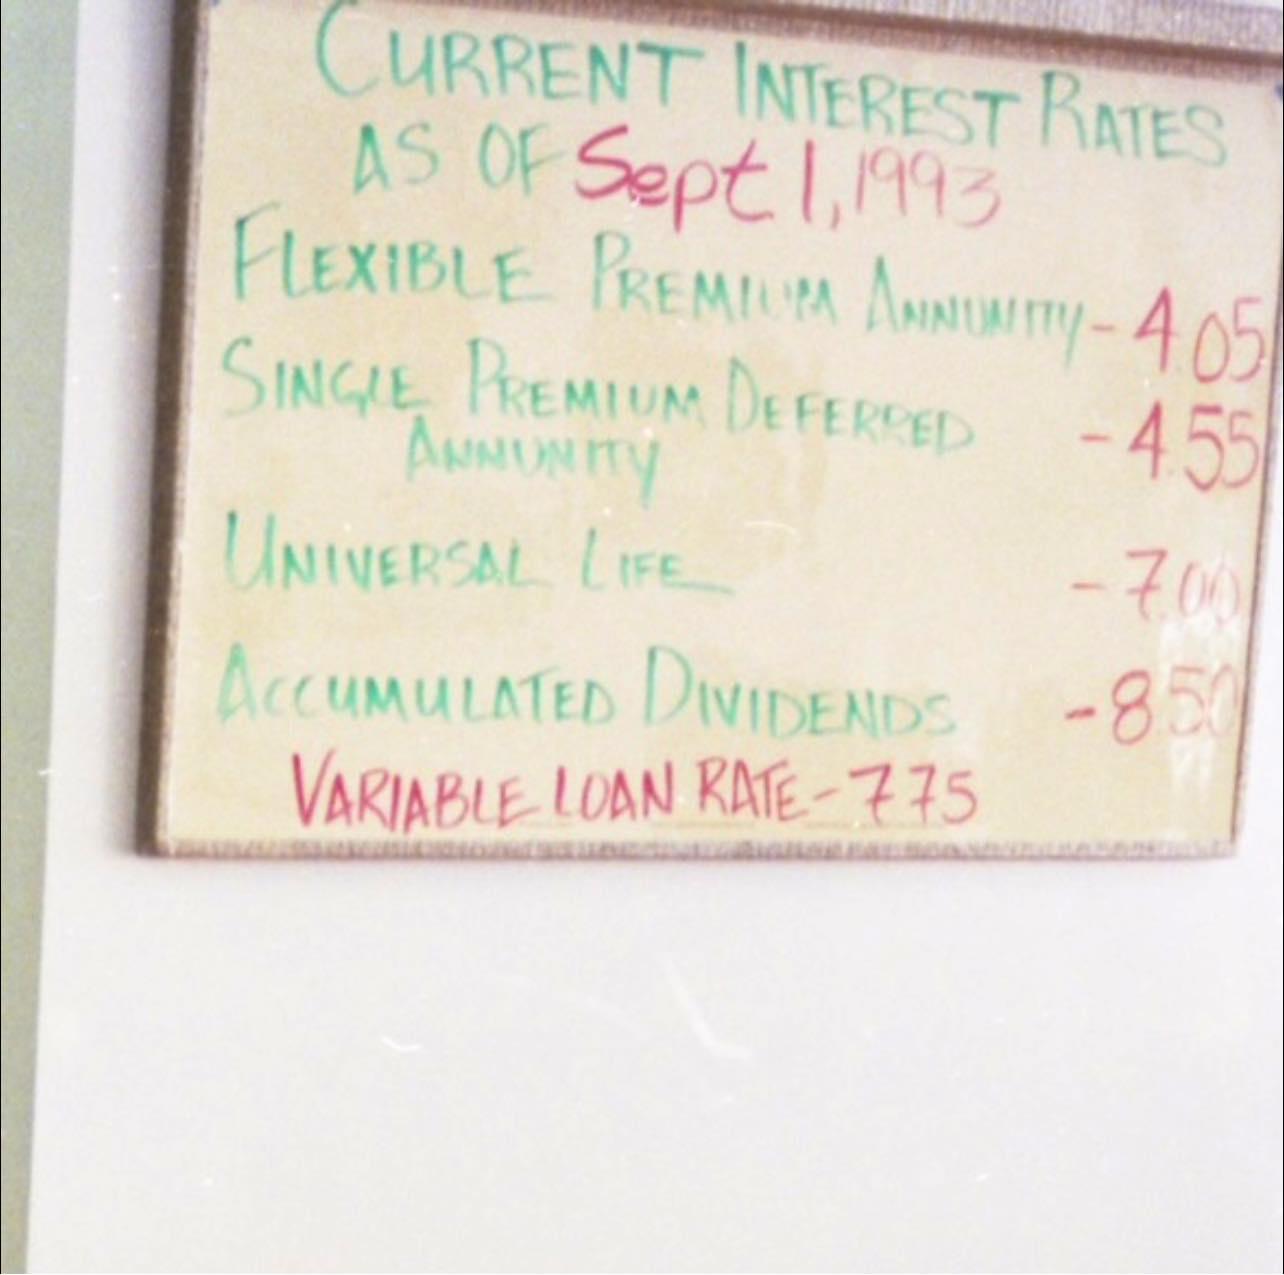 CHECK OUT THISE INTEREST RATES FROM 1993!!